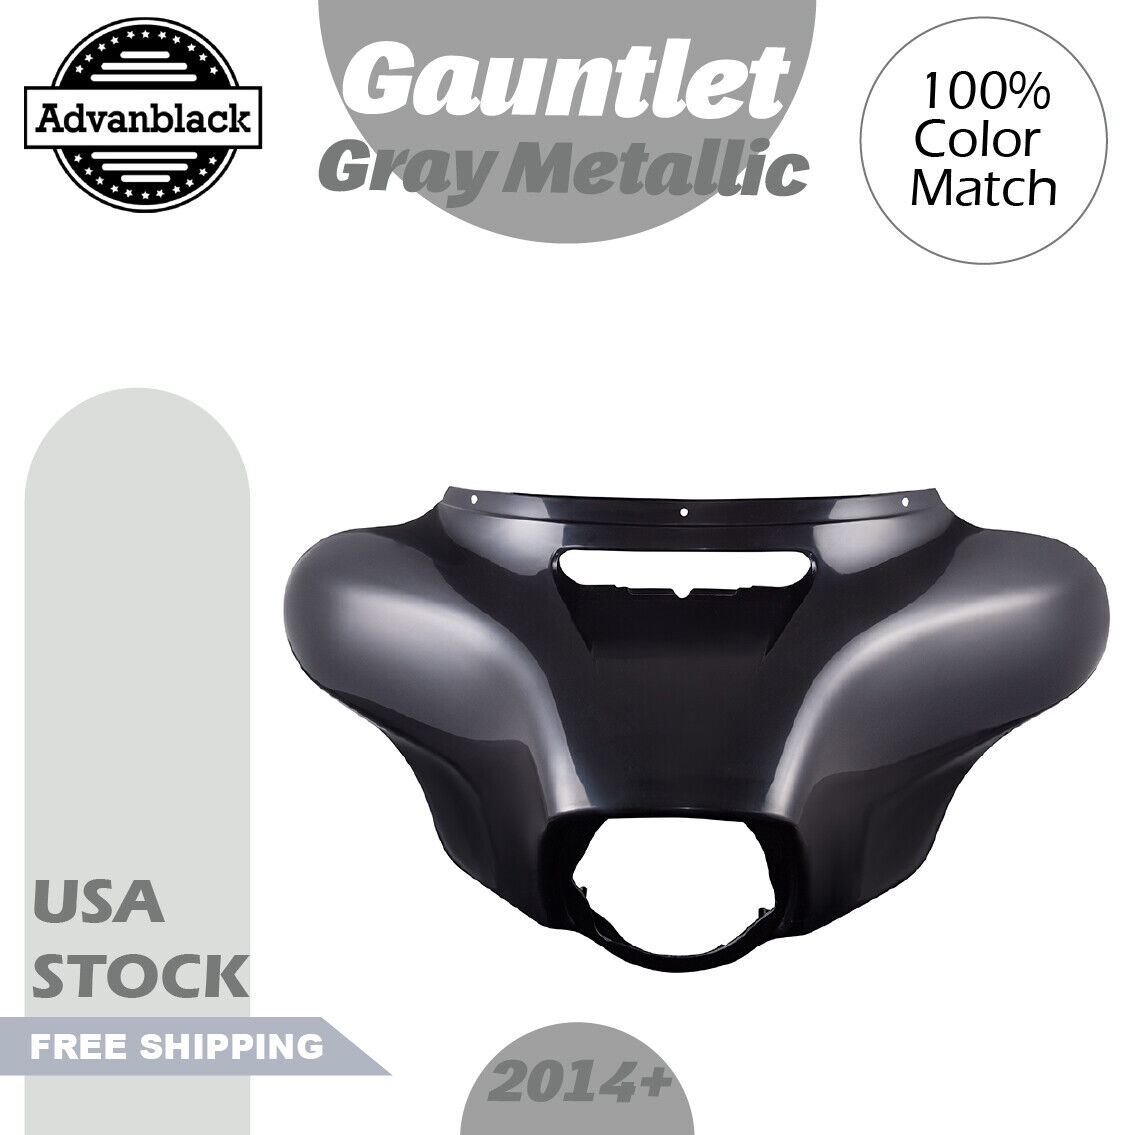 Gauntlet Gray Metallic Outer Fairing Batwing Cowl For Harley Street Glide Ultra